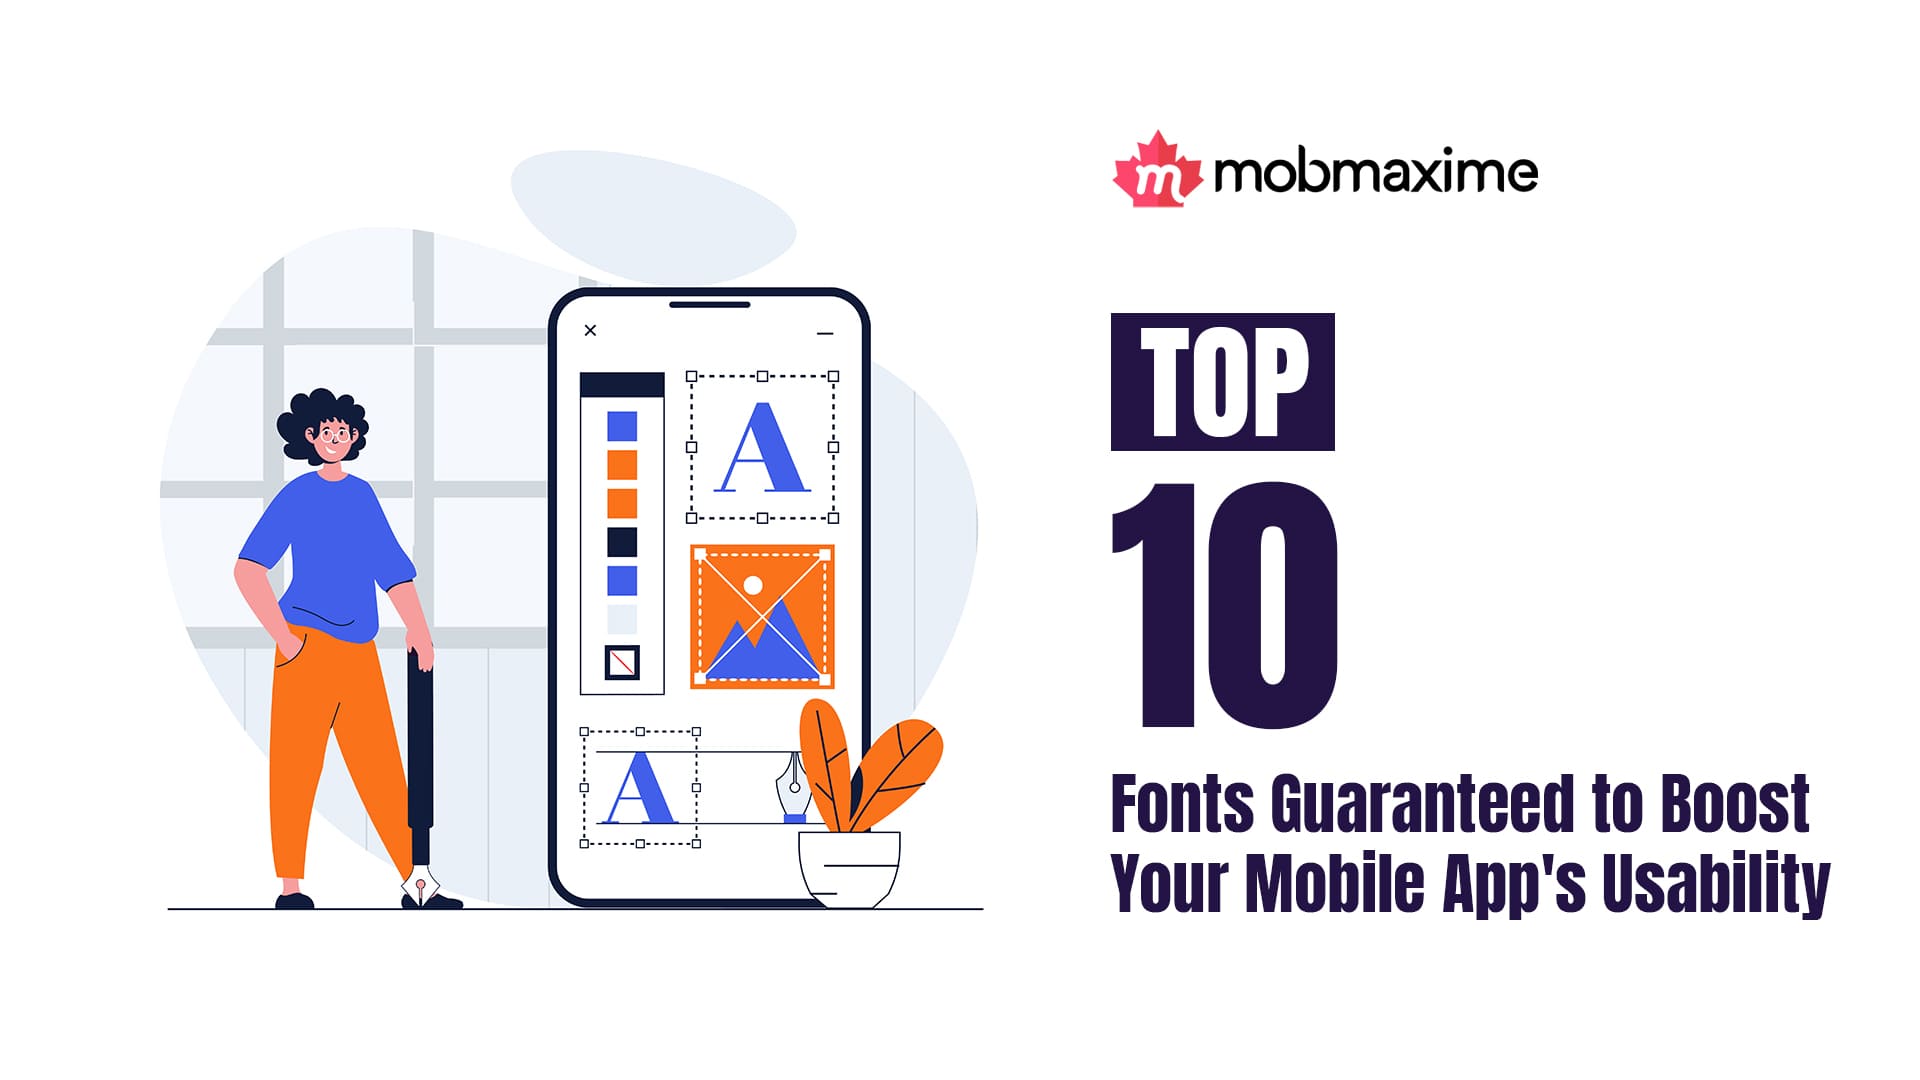 Top 10 Fonts Guaranteed to Boost Your Mobile App’s Usability